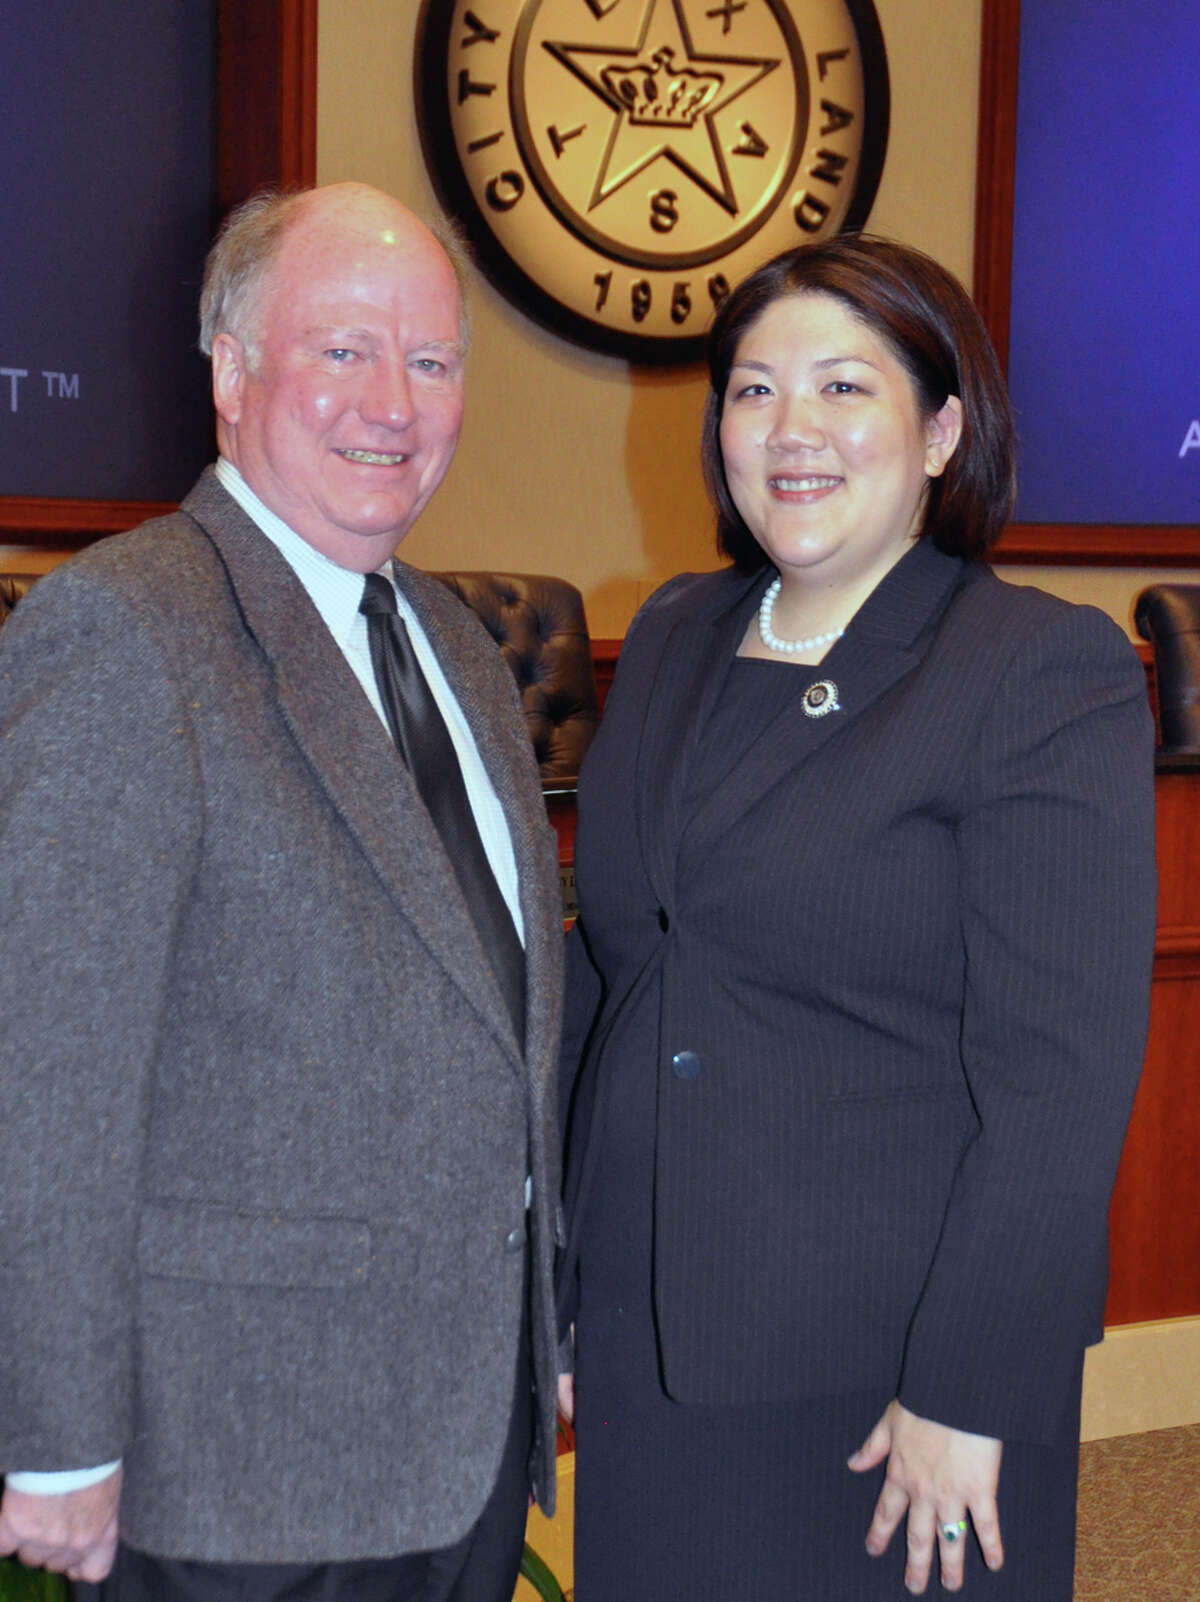 Jennifer C. Chiang is the new associate judge for the city of Sugar Land. She will work with Judge Craig Landin.